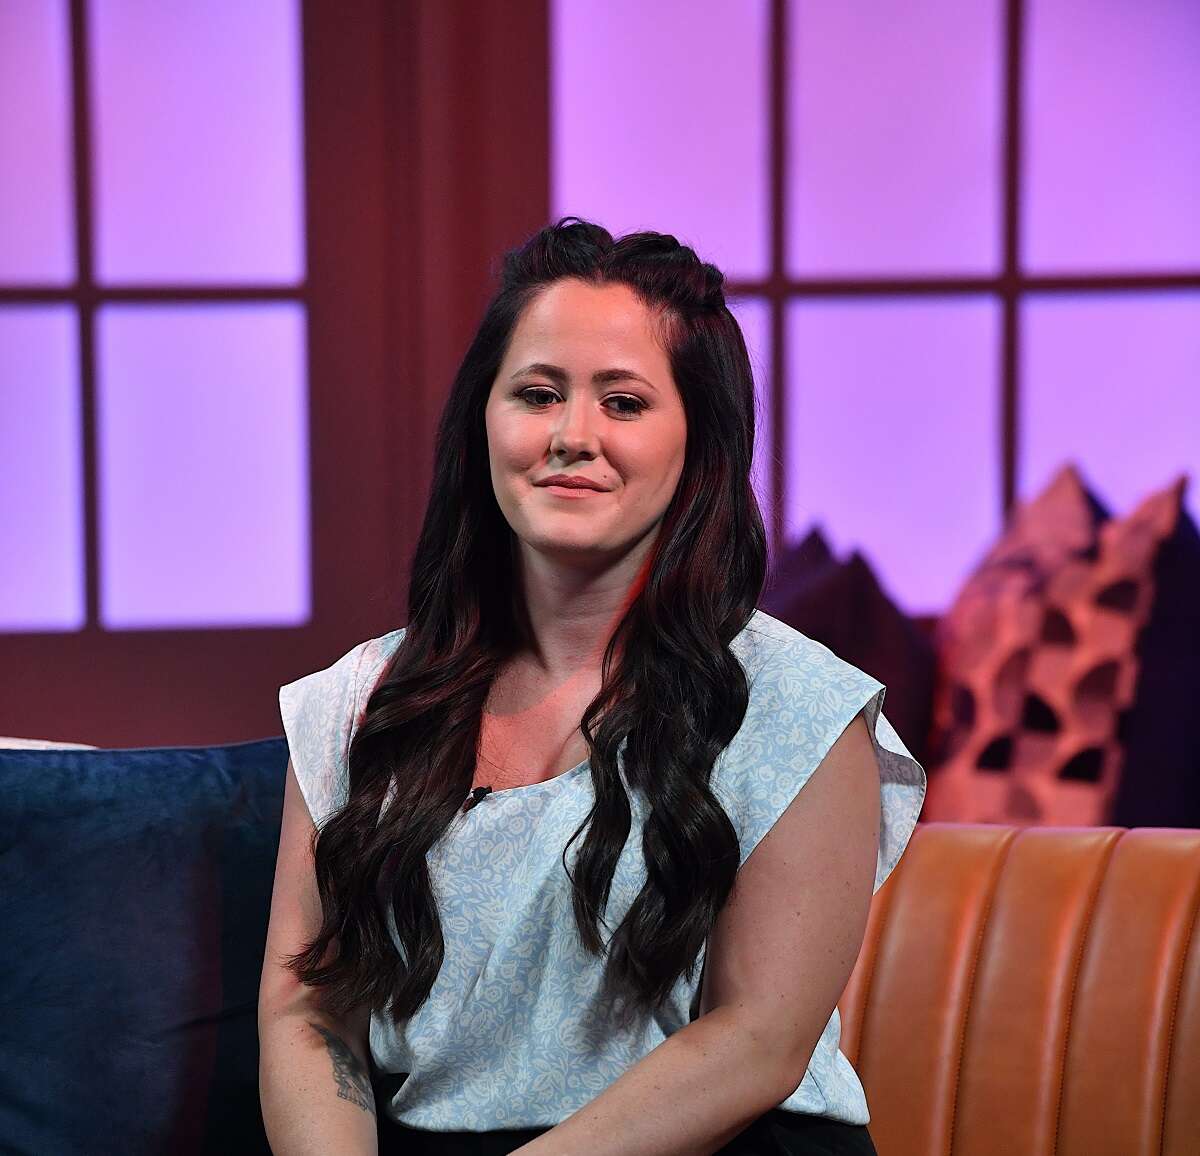 Jenelle Evans is seen on the set of "Candace" on May 24, 2021 in Nashville, Tennessee